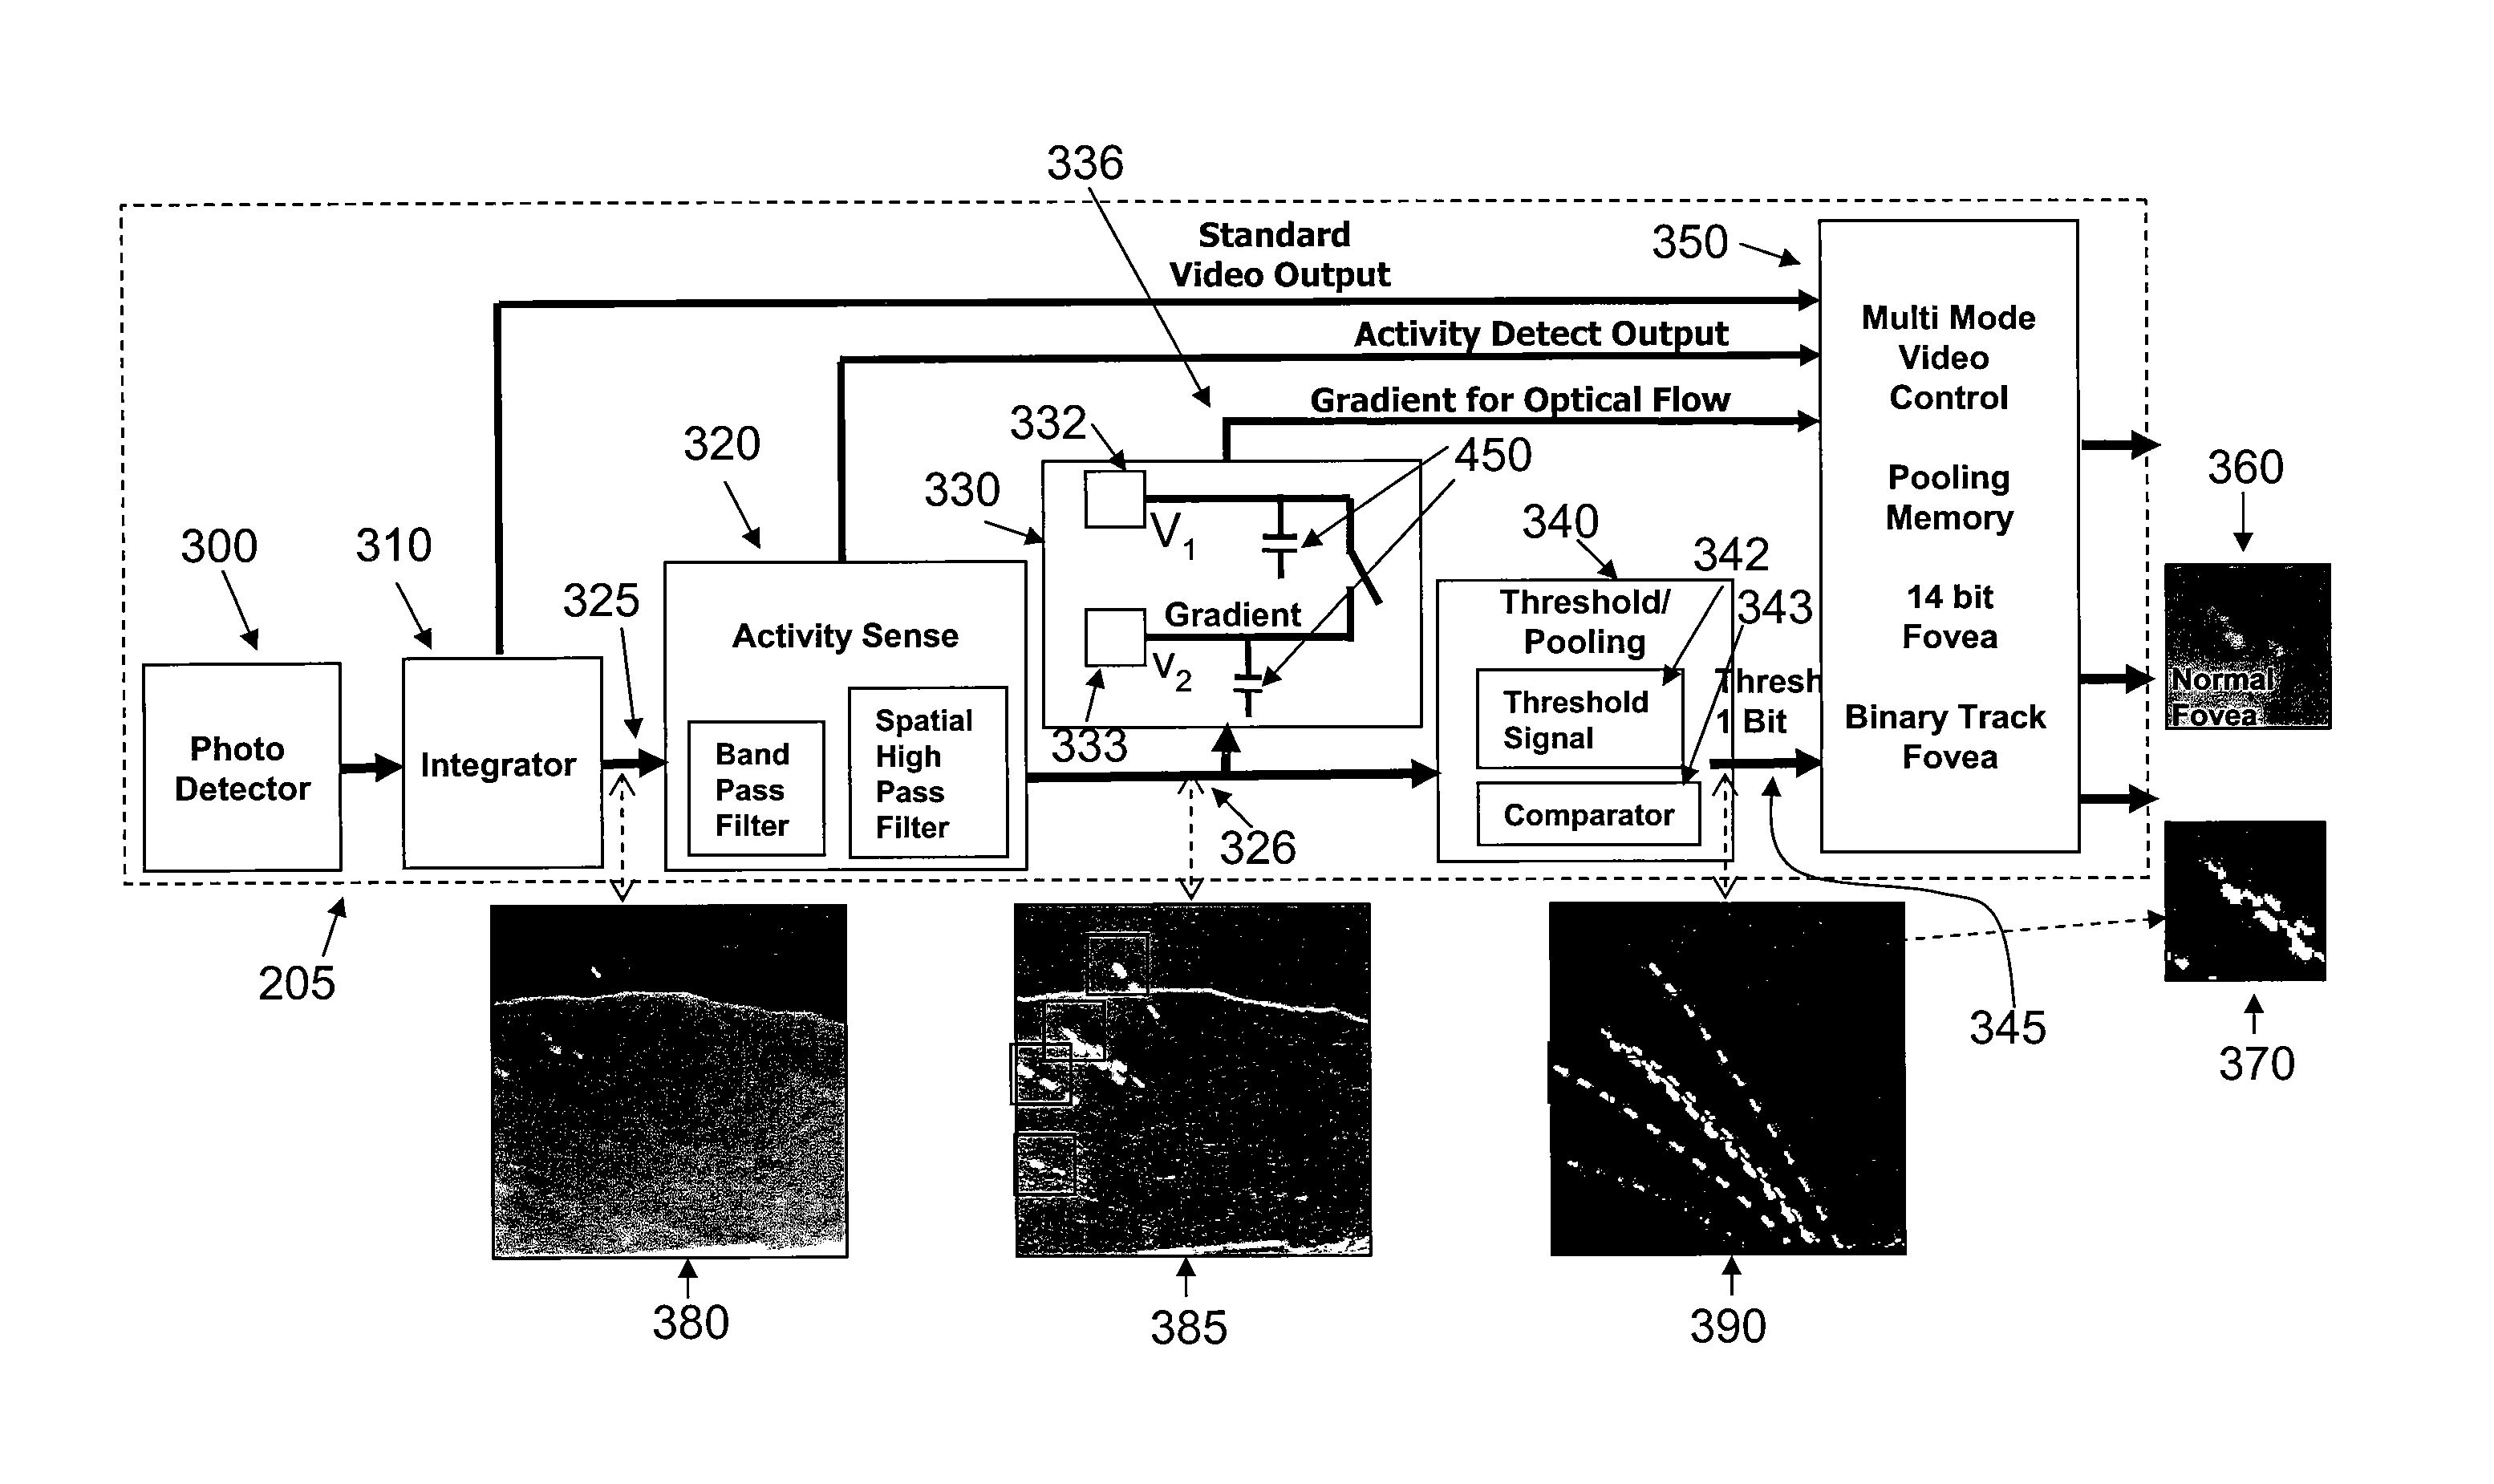 Imaging detecting with automated sensing of an object or characteristic of that object